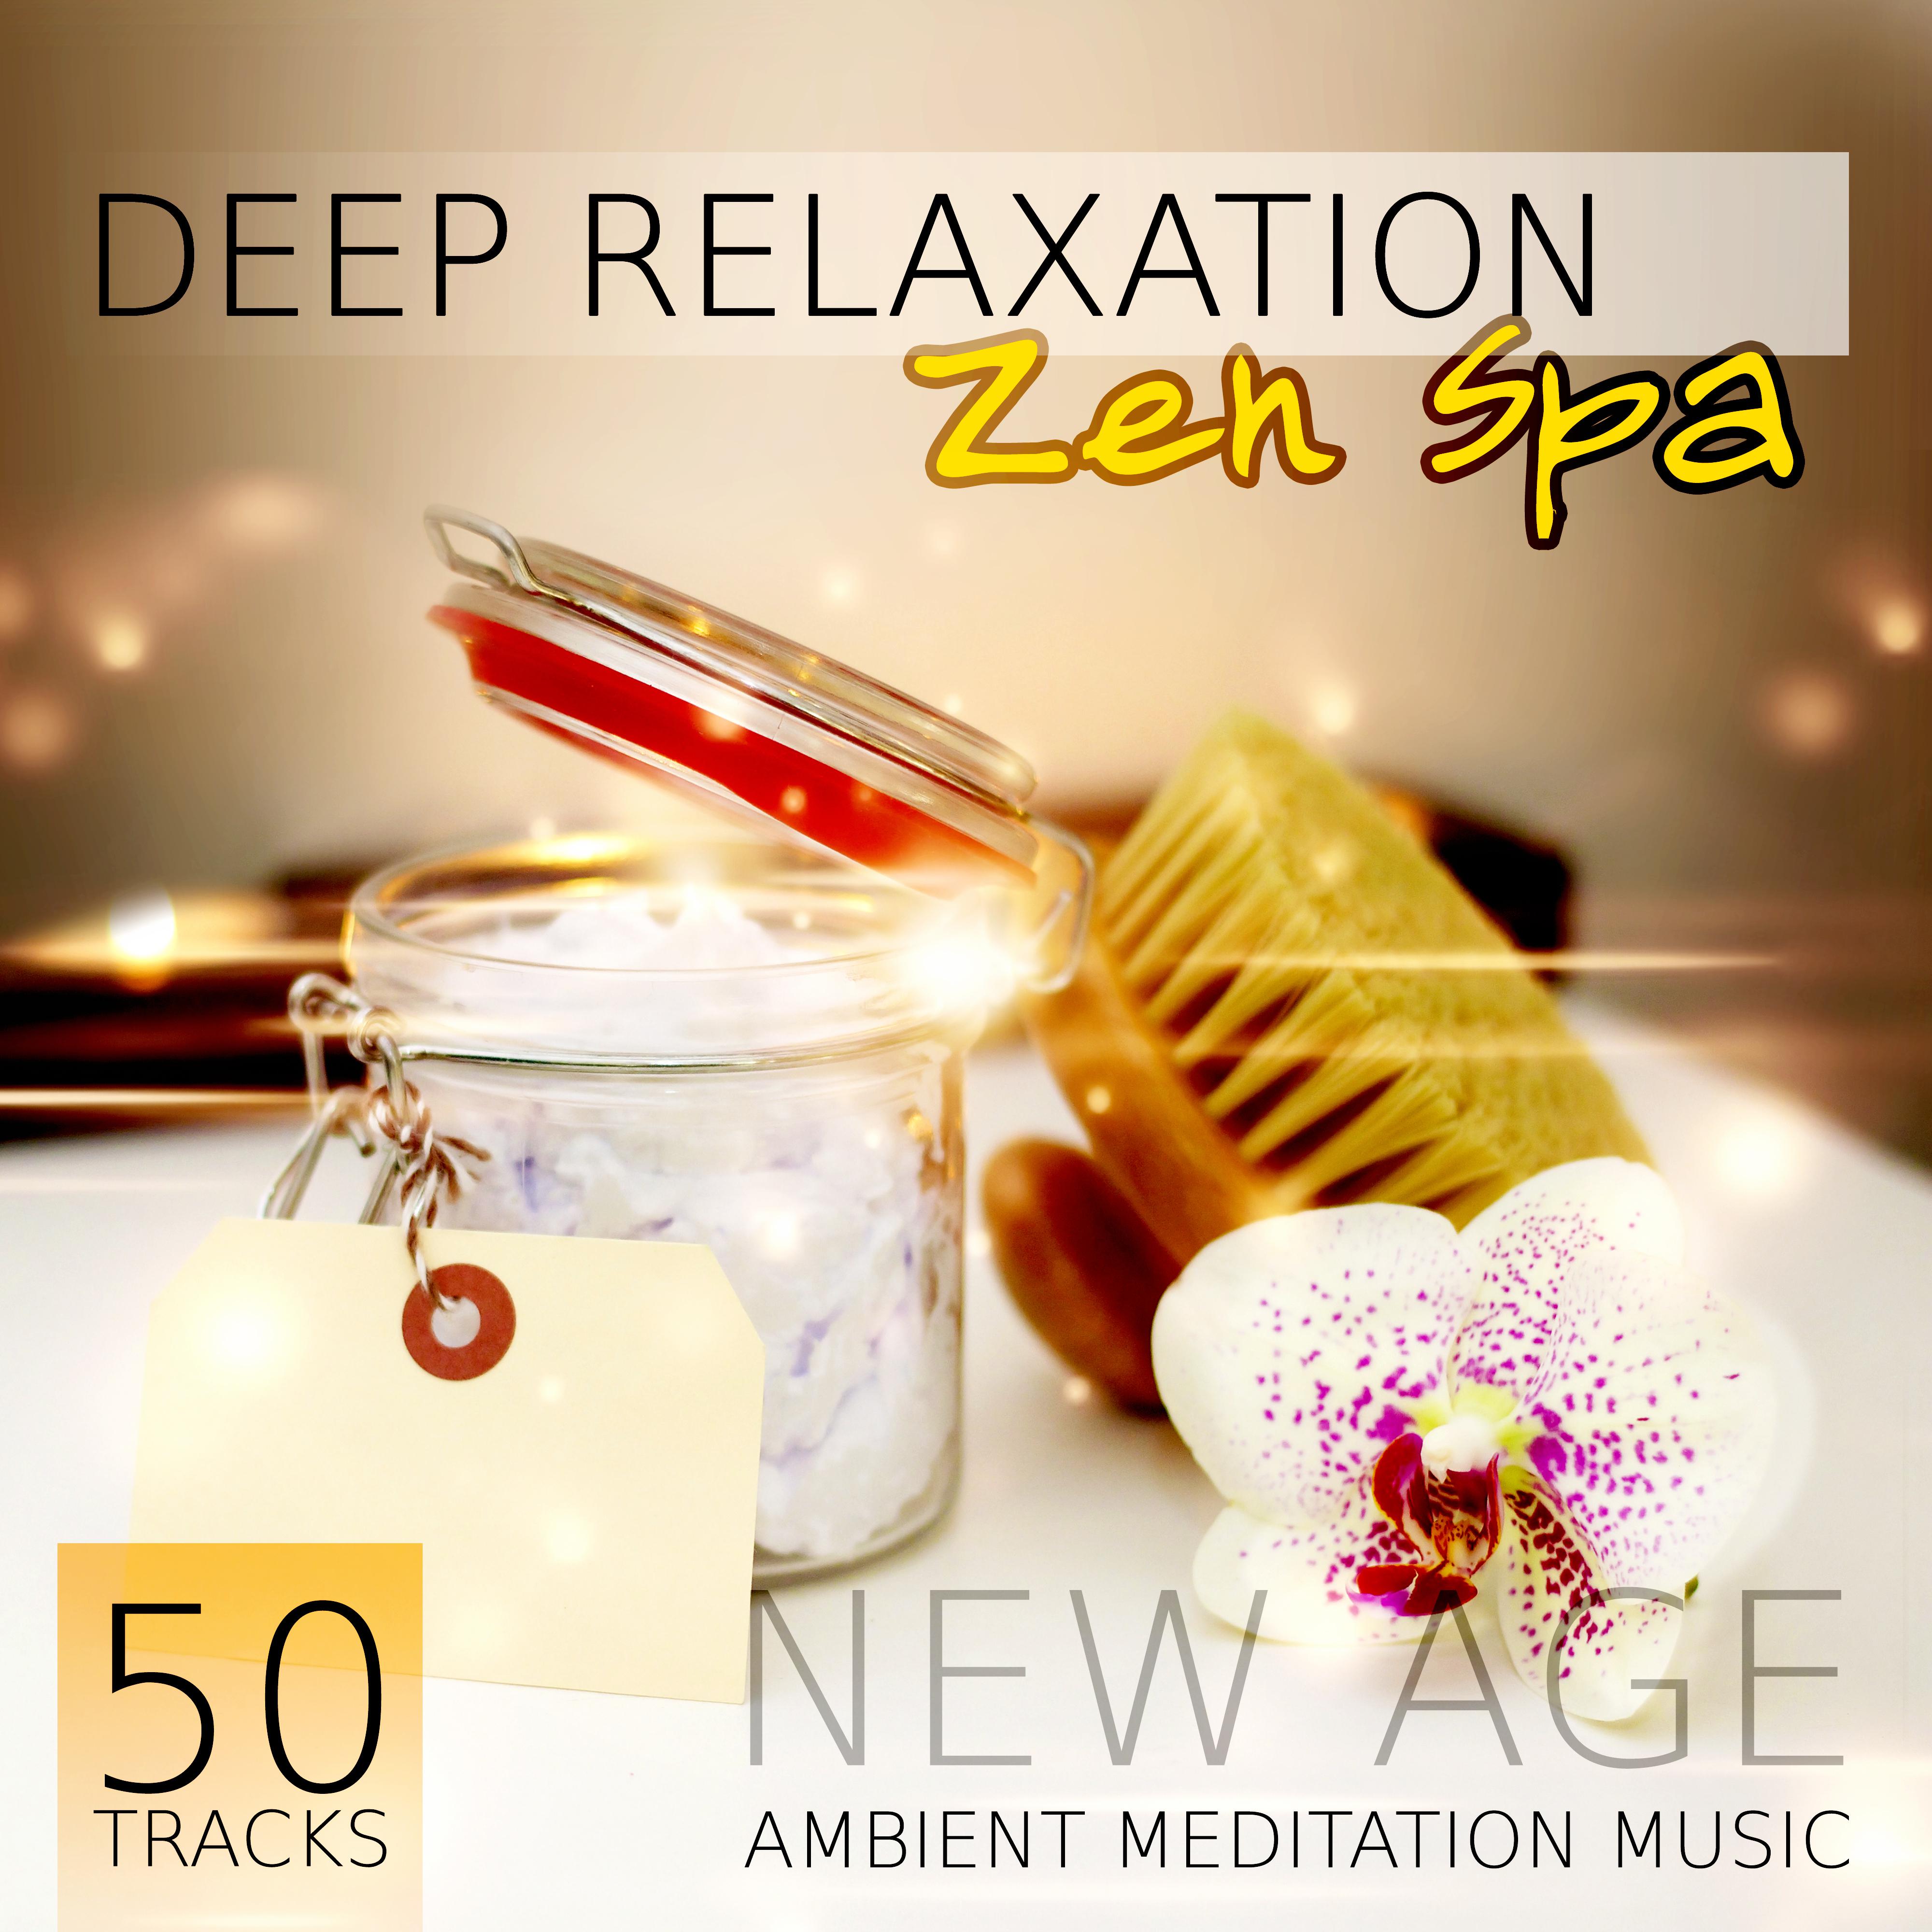 Deep Relaxation Zen Spa - 50 Tracks New Age Ambient Meditation Music for Natural Healing, Buddha Chill, Massage, Reiki